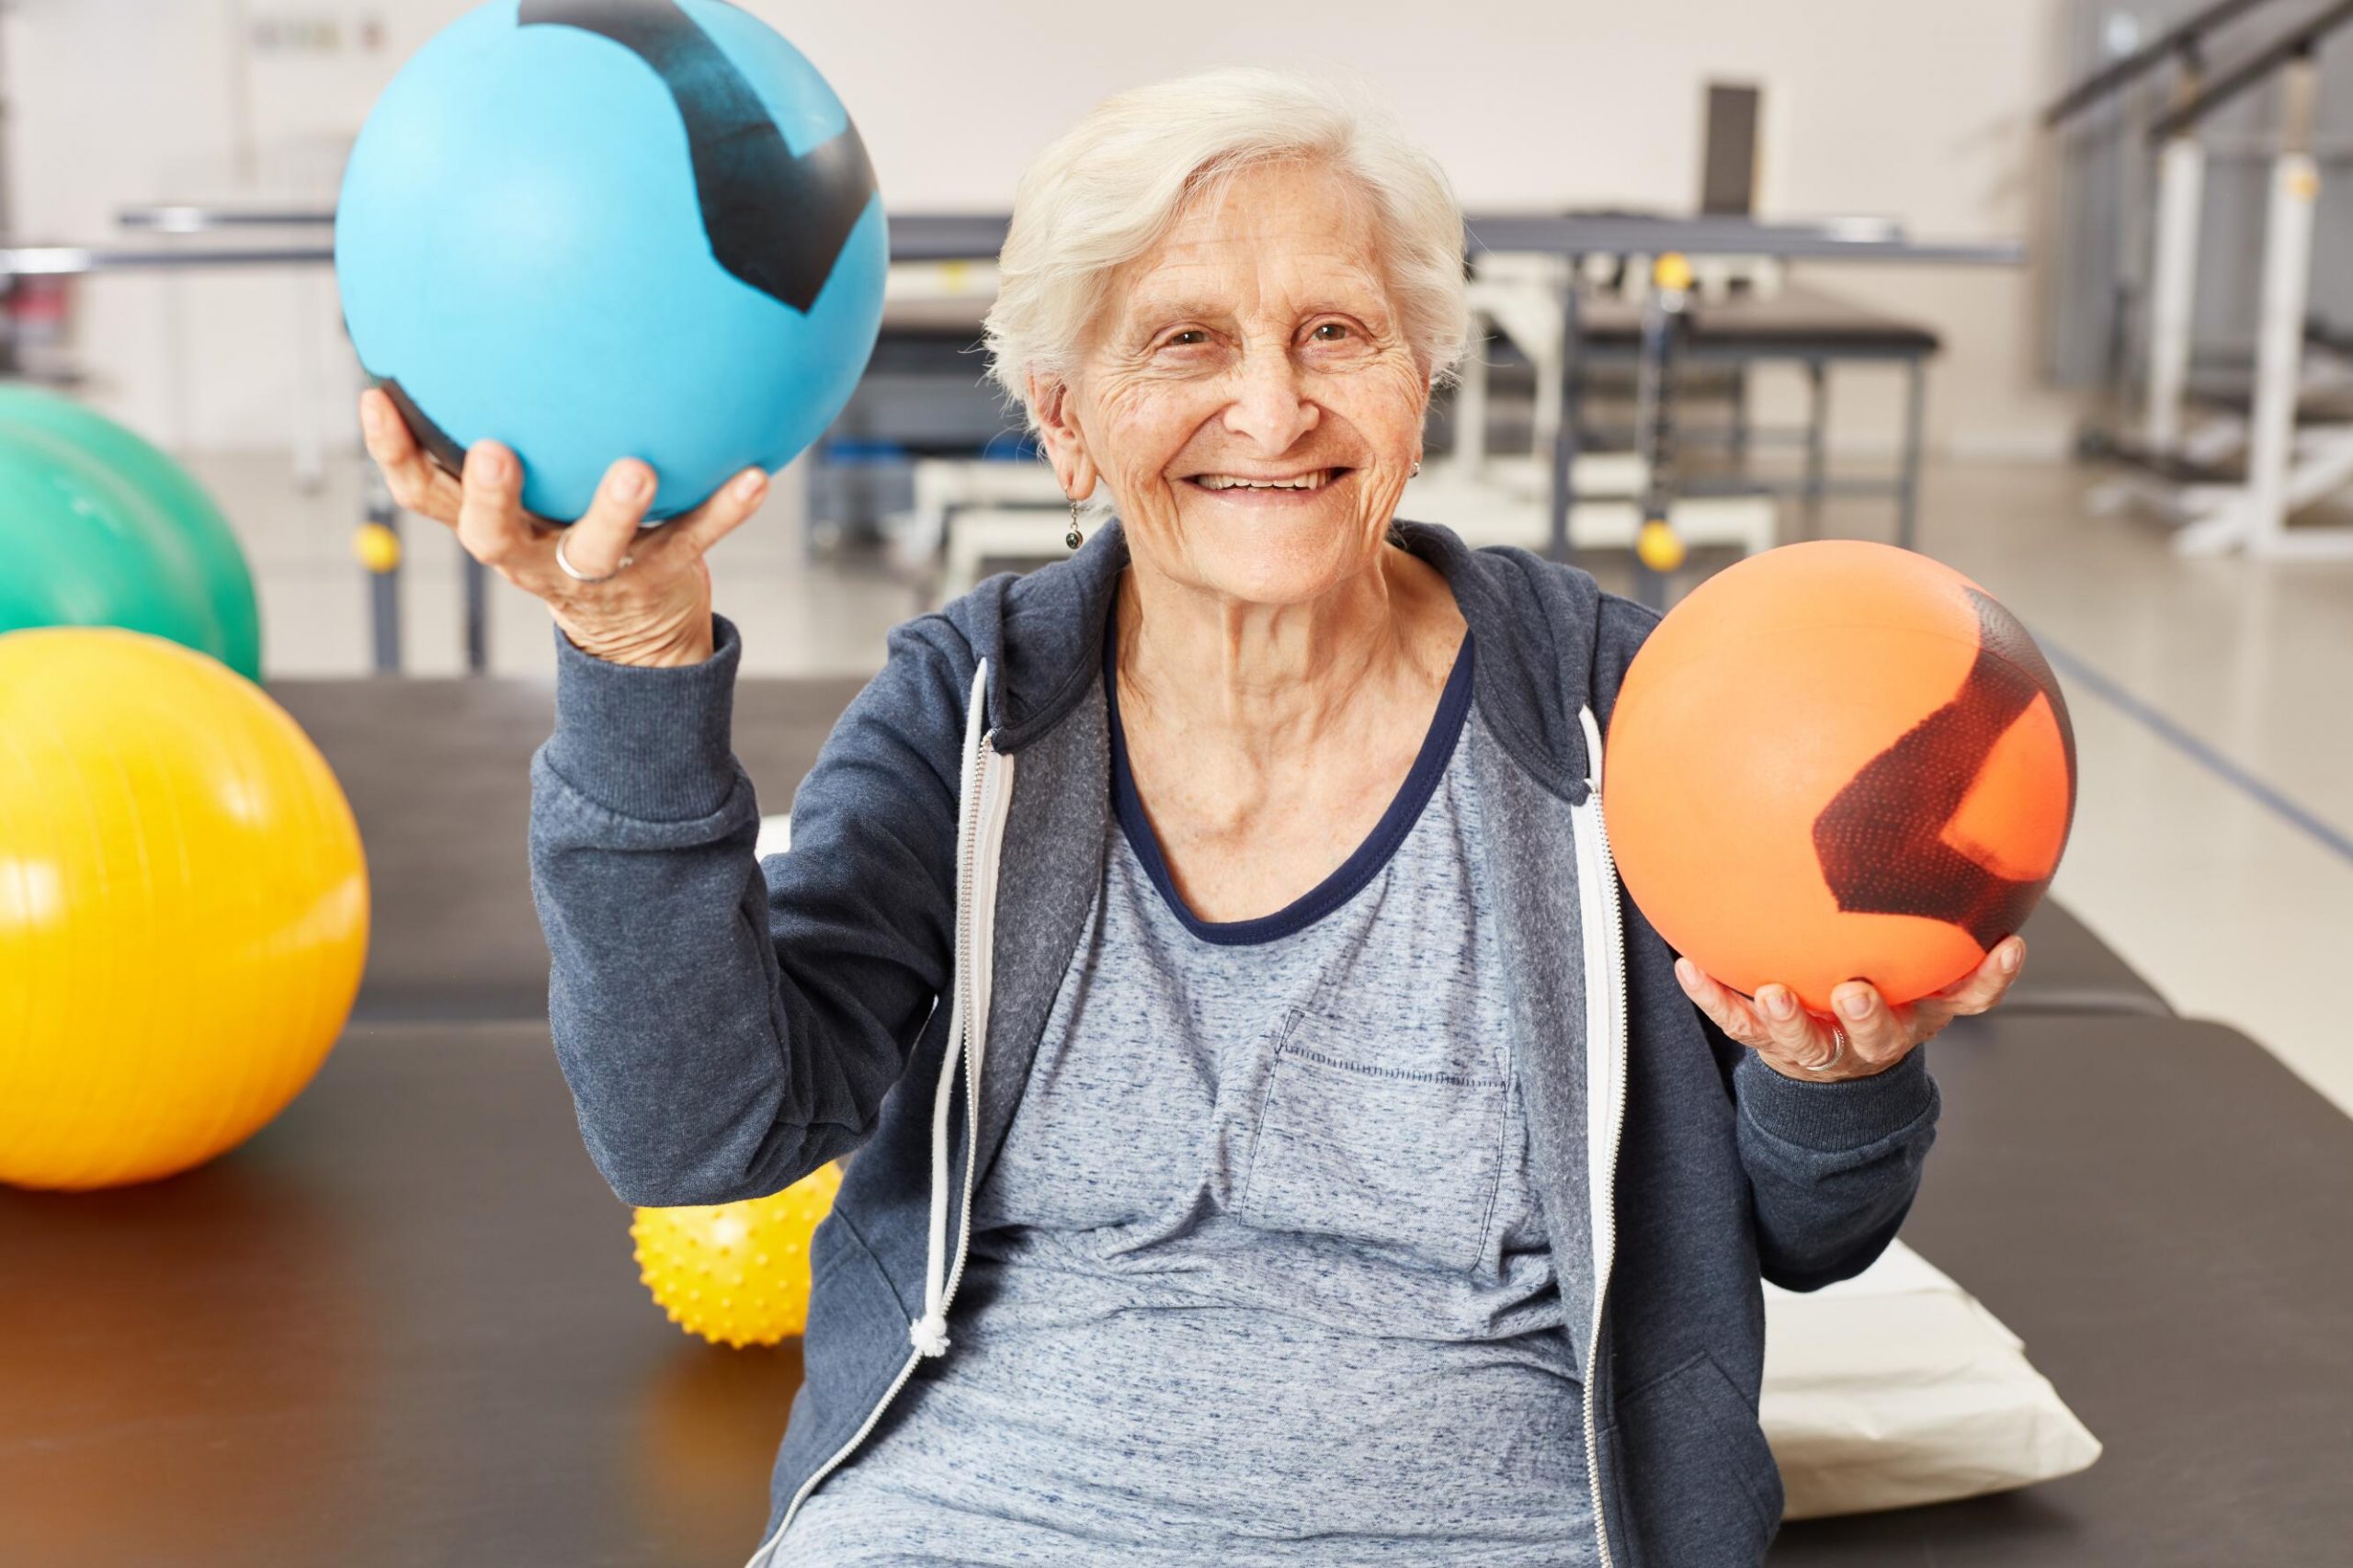 Senior woman balances balls as exercise for coordination in occupational therapy